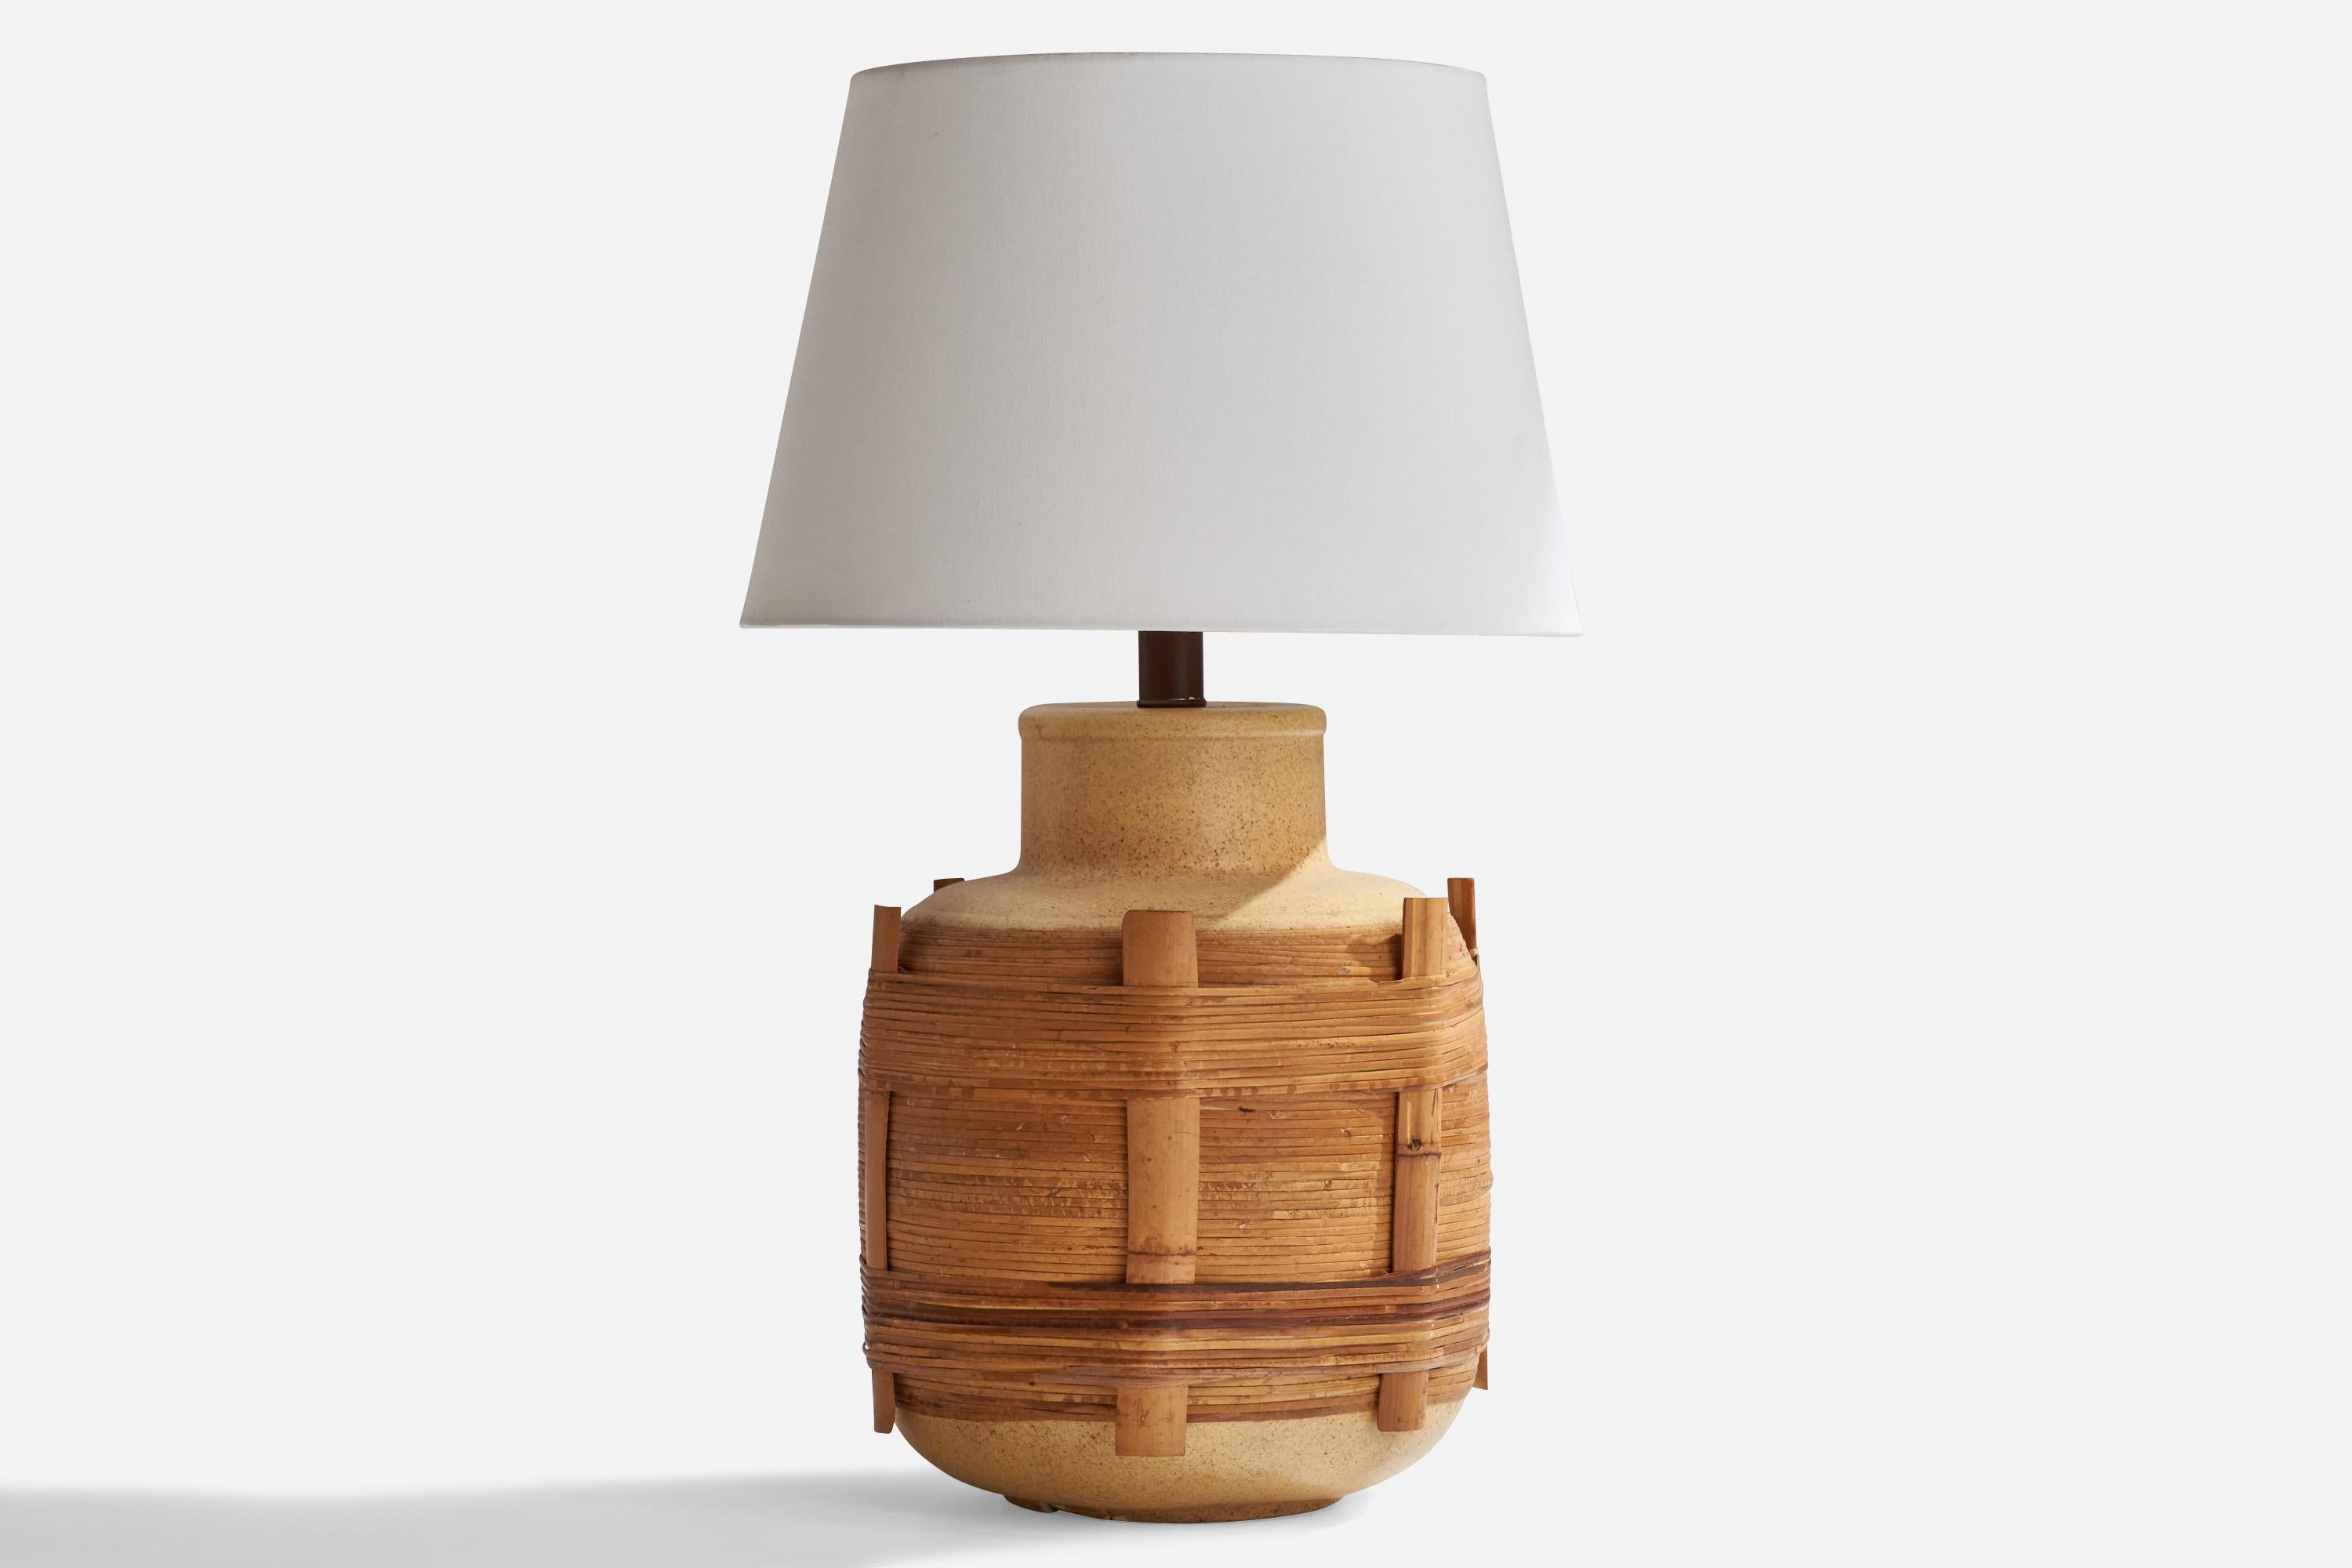 A beige-glazed ceramic, bamboo and rattan table lamp designed and produced in the US, c. 1950s.

Dimensions of Lamp (inches): 21.5”  H x 12” Diameter
Dimensions of Shade (inches): 12”Top Diameter x 16”  Bottom Diameter x 11.75” H
Dimensions of Lamp